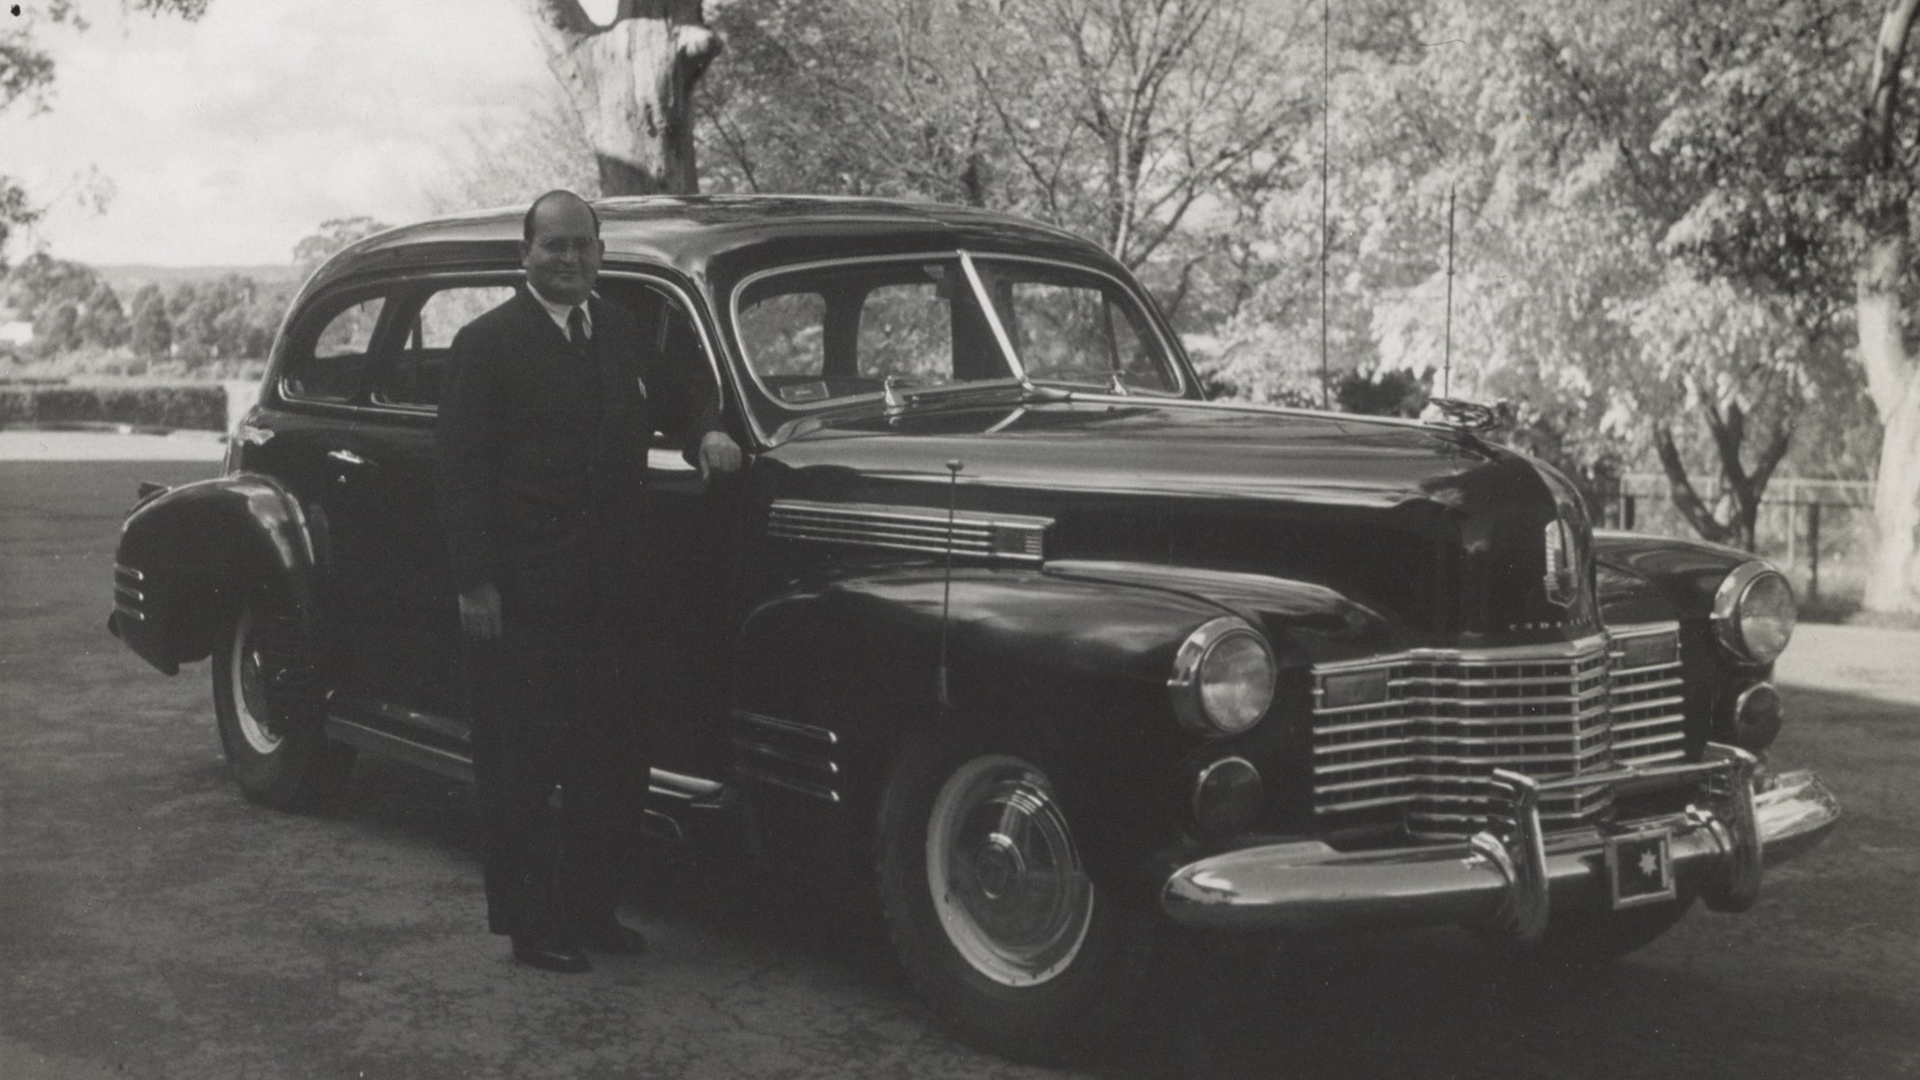 A black and white photo showing a man standing by a dark old-style car.